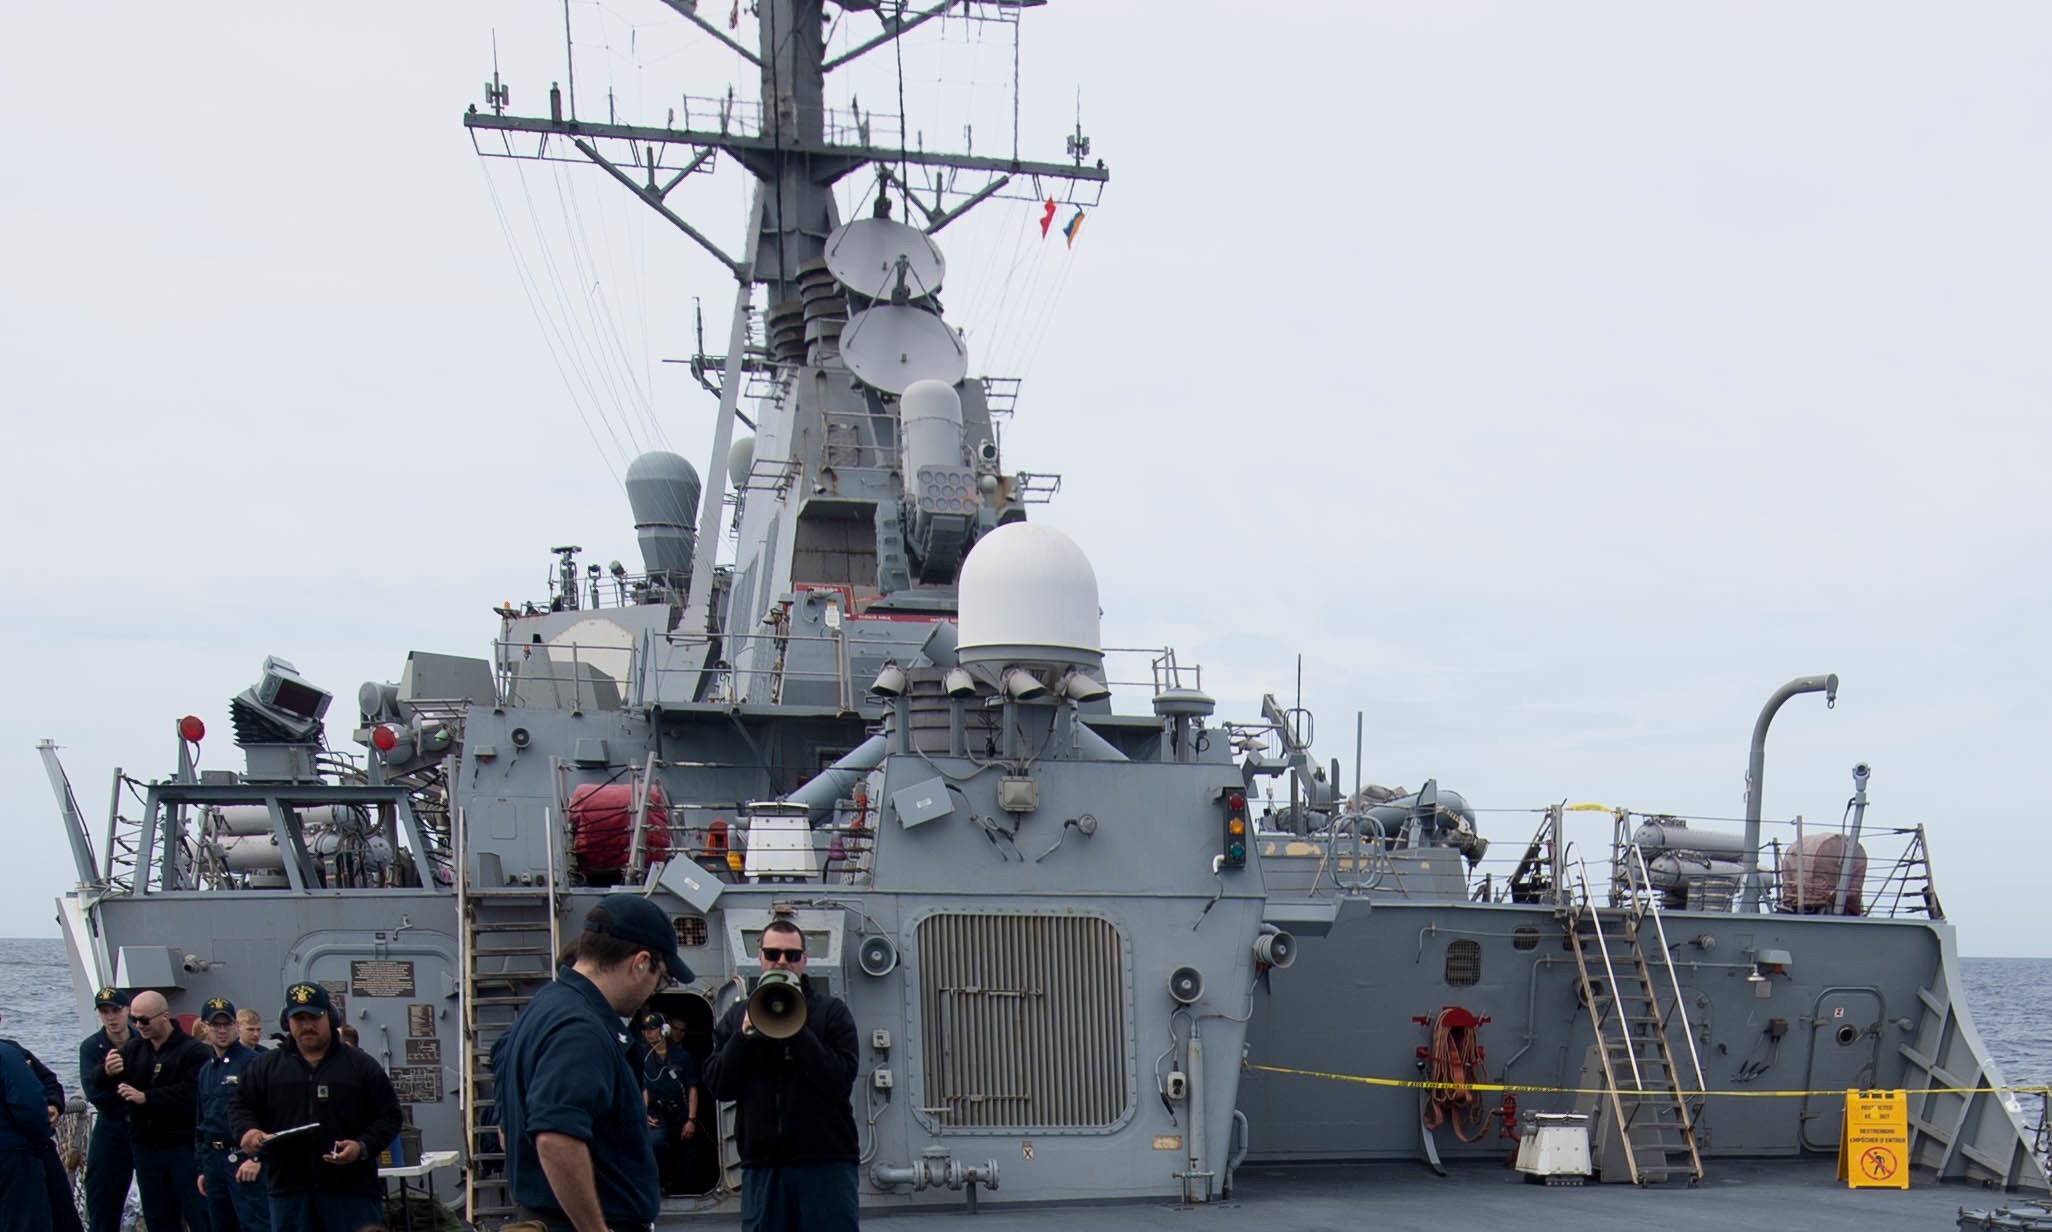 ddg-71 uss ross guided missile destroyer arleigh burke class aegis bmd 03